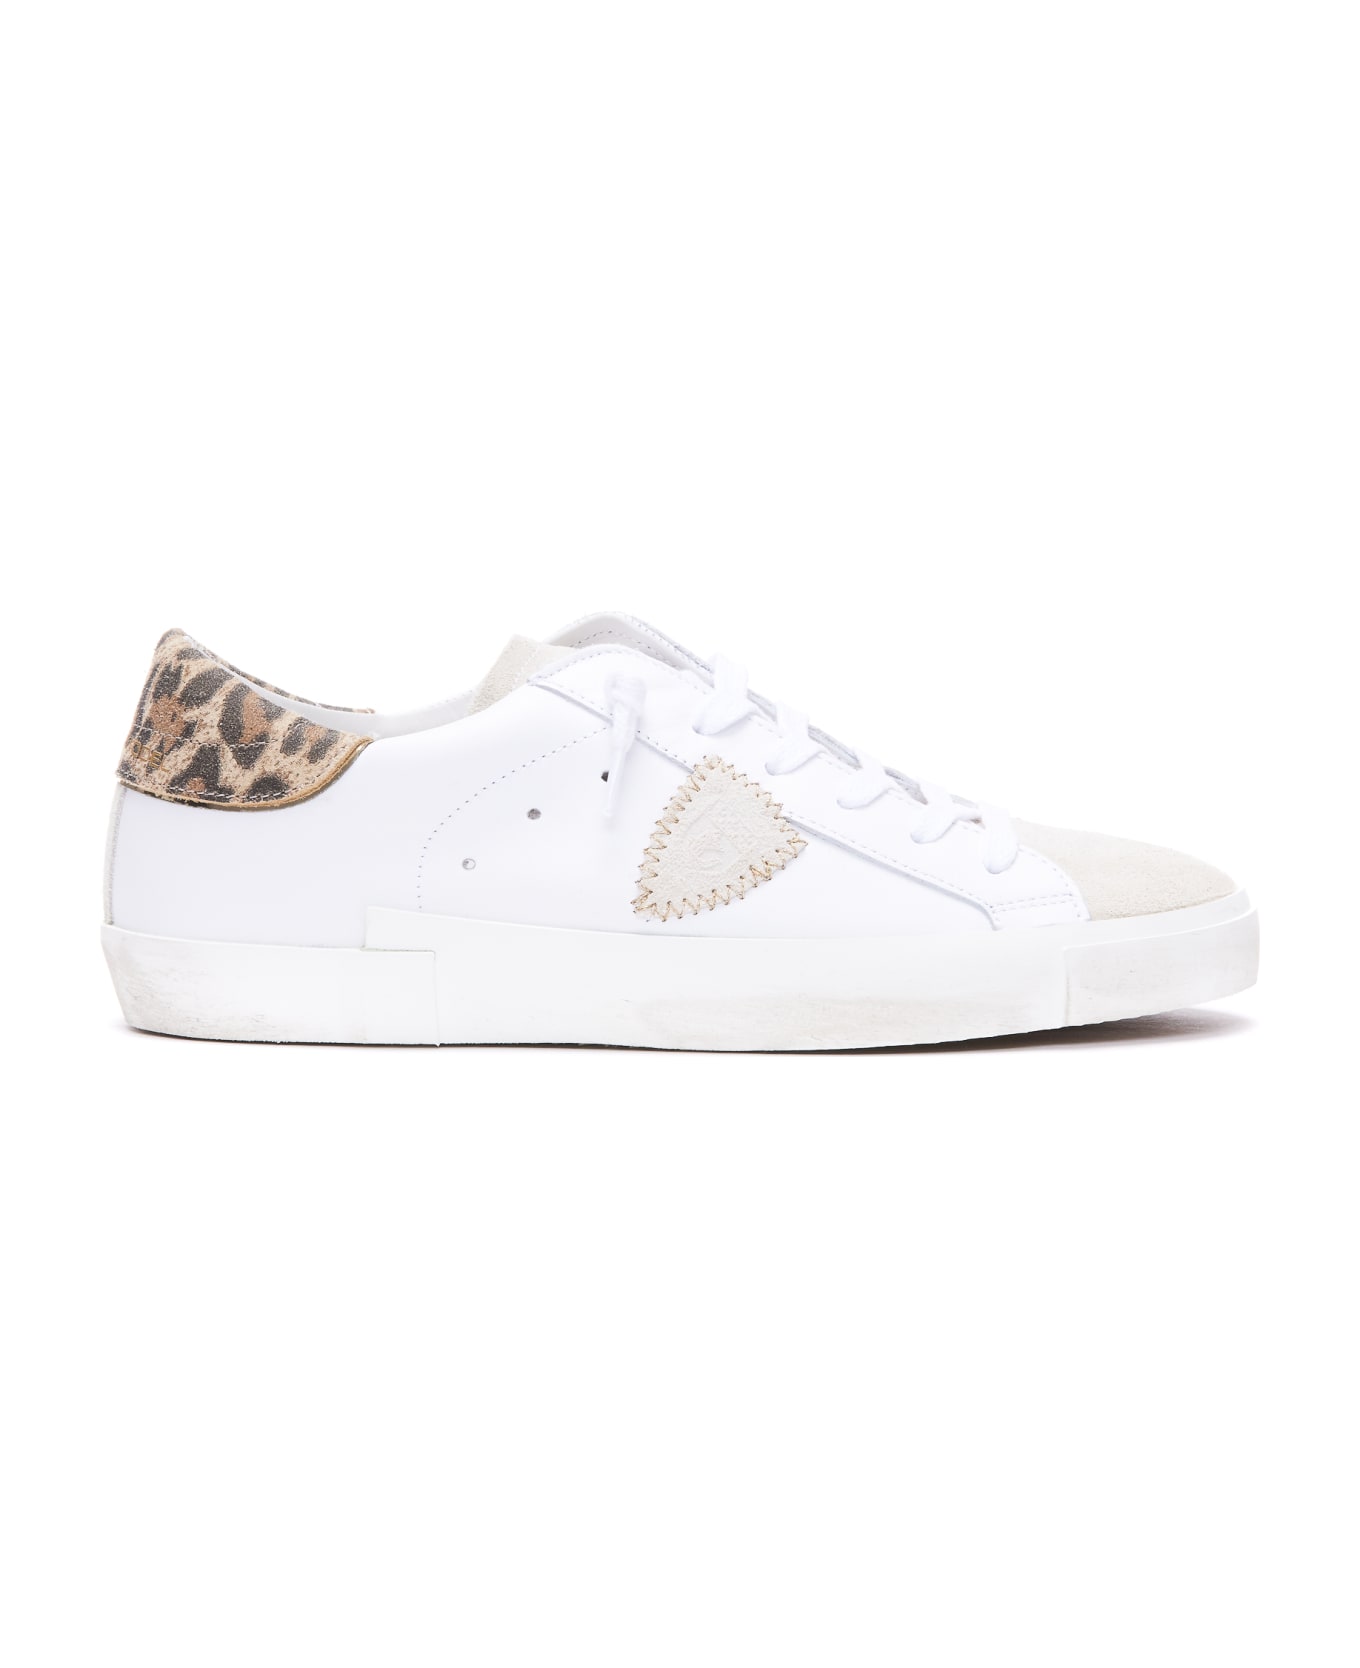 Philippe Model Prsx Low Sneakers - White 2